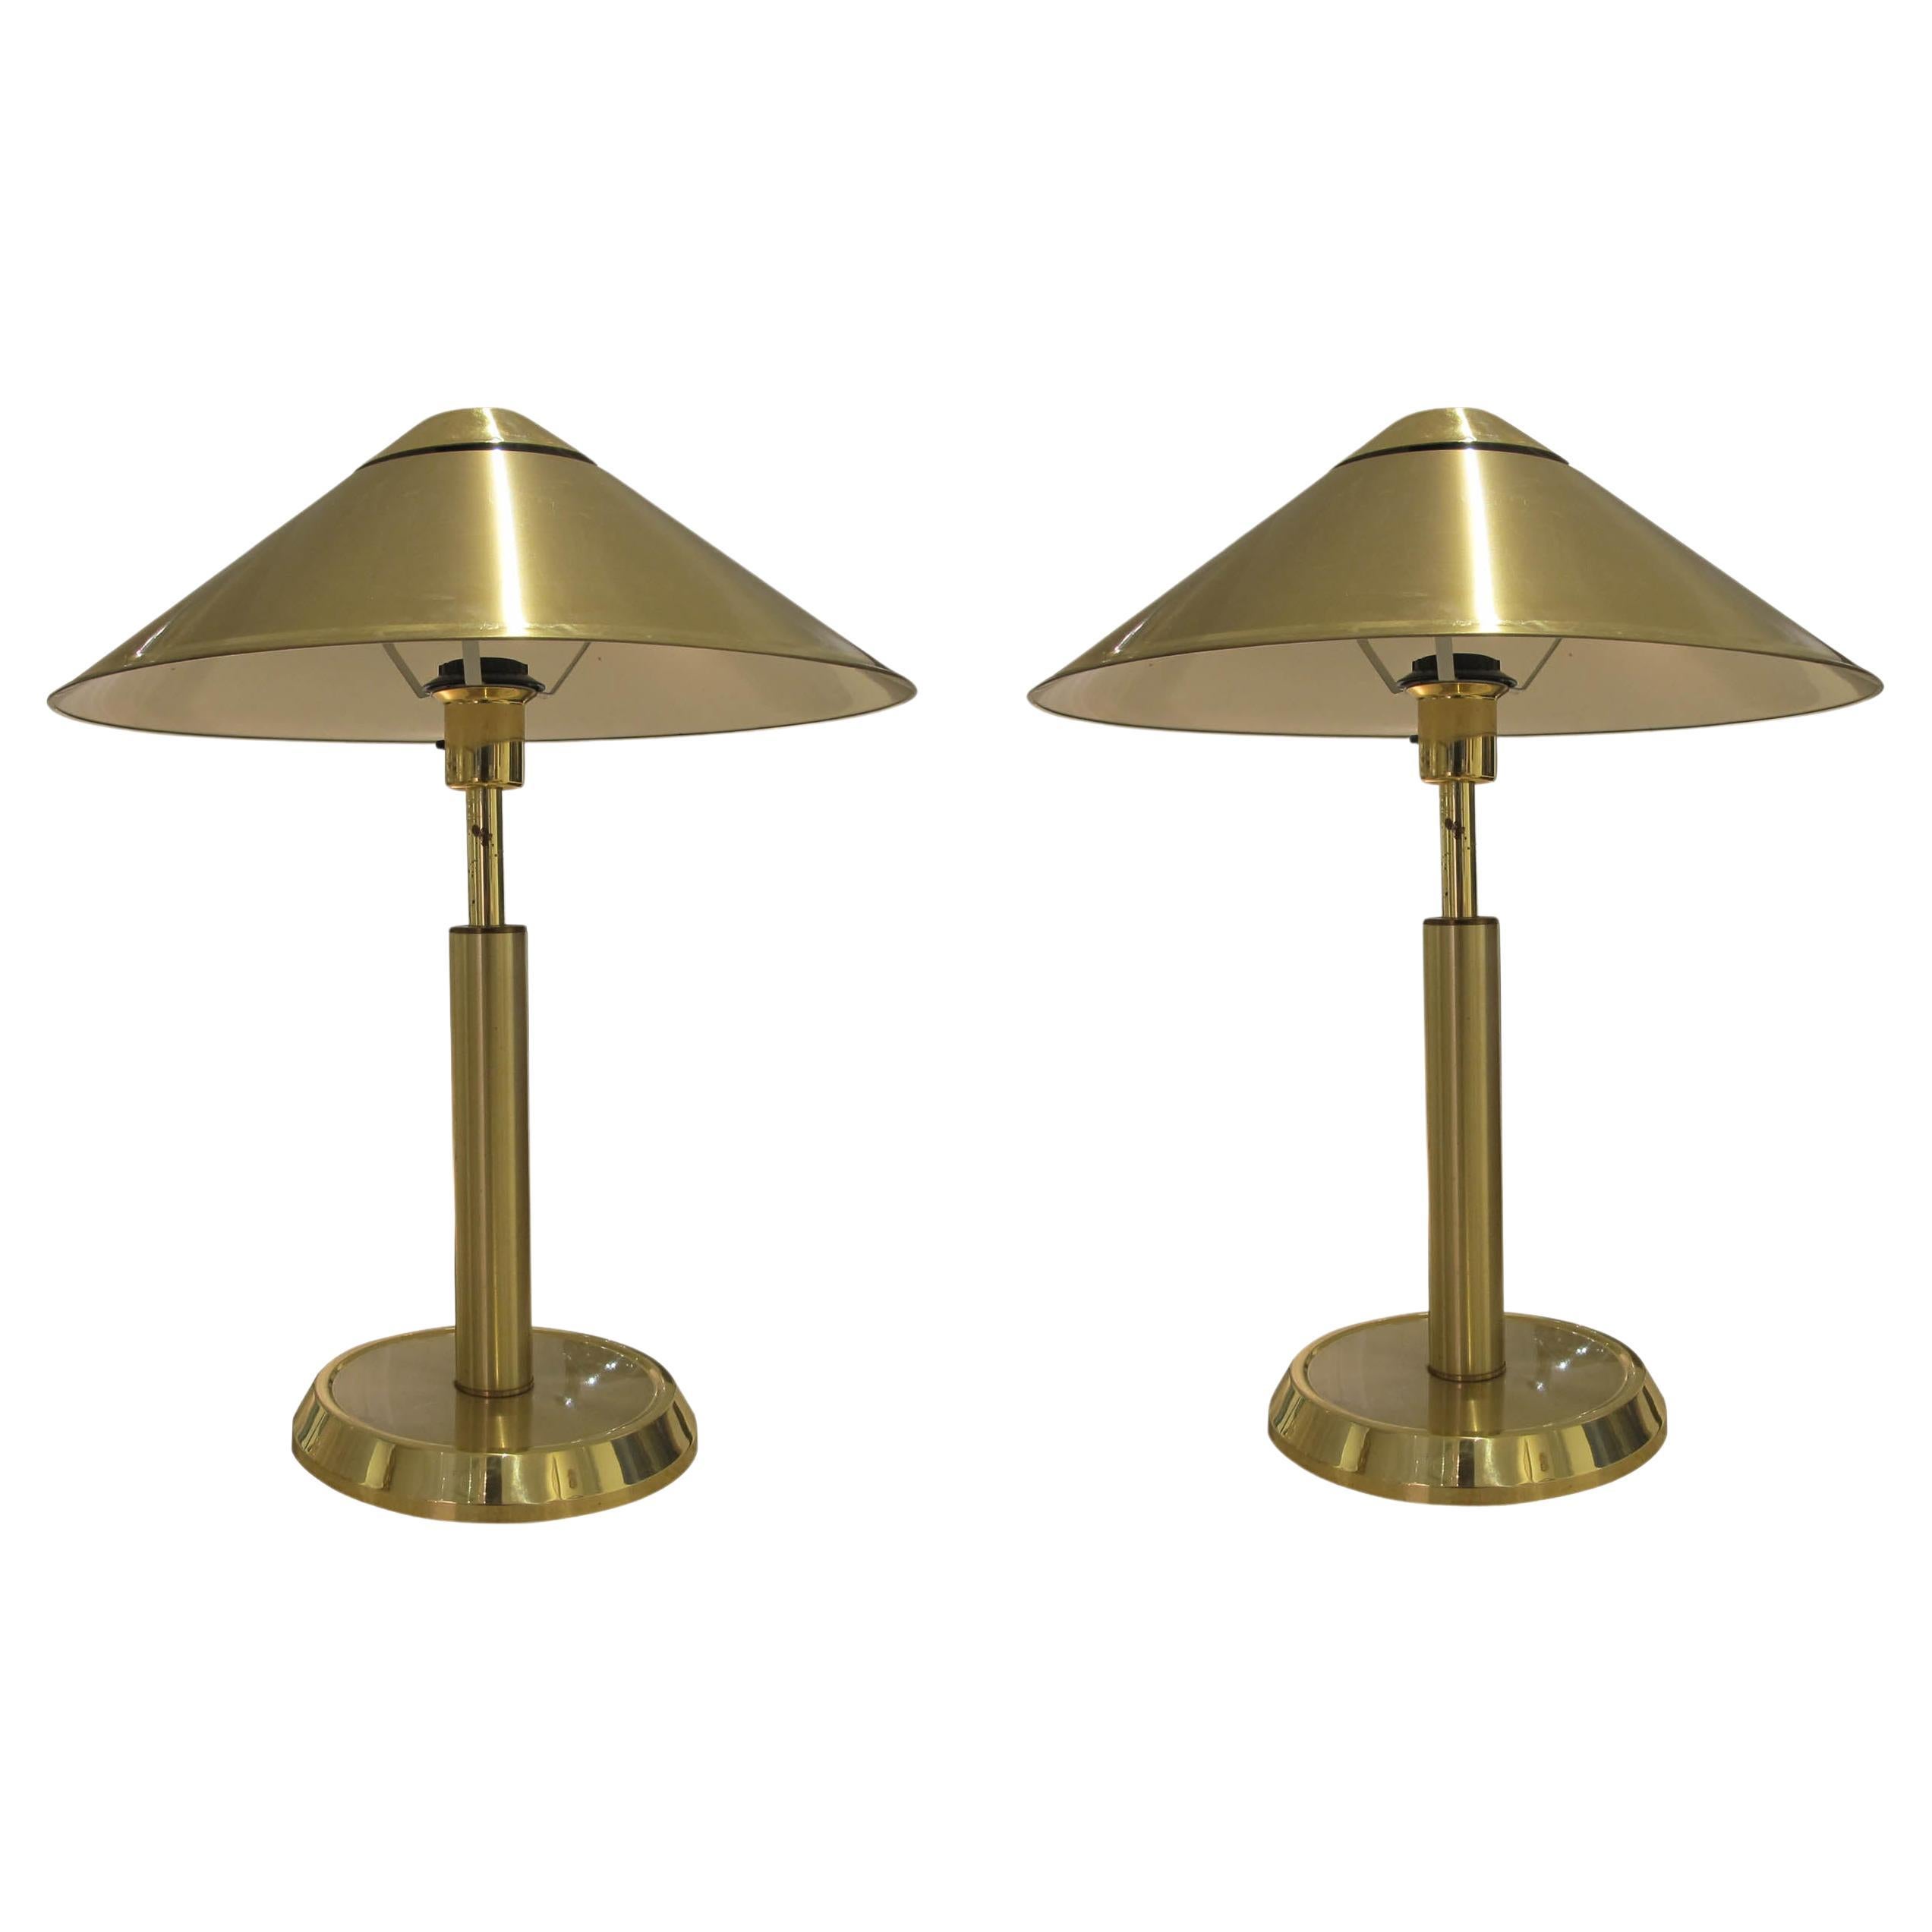 1970s Swedish Large Pair Of Brass Table Lamps With Cone Shaped Shades